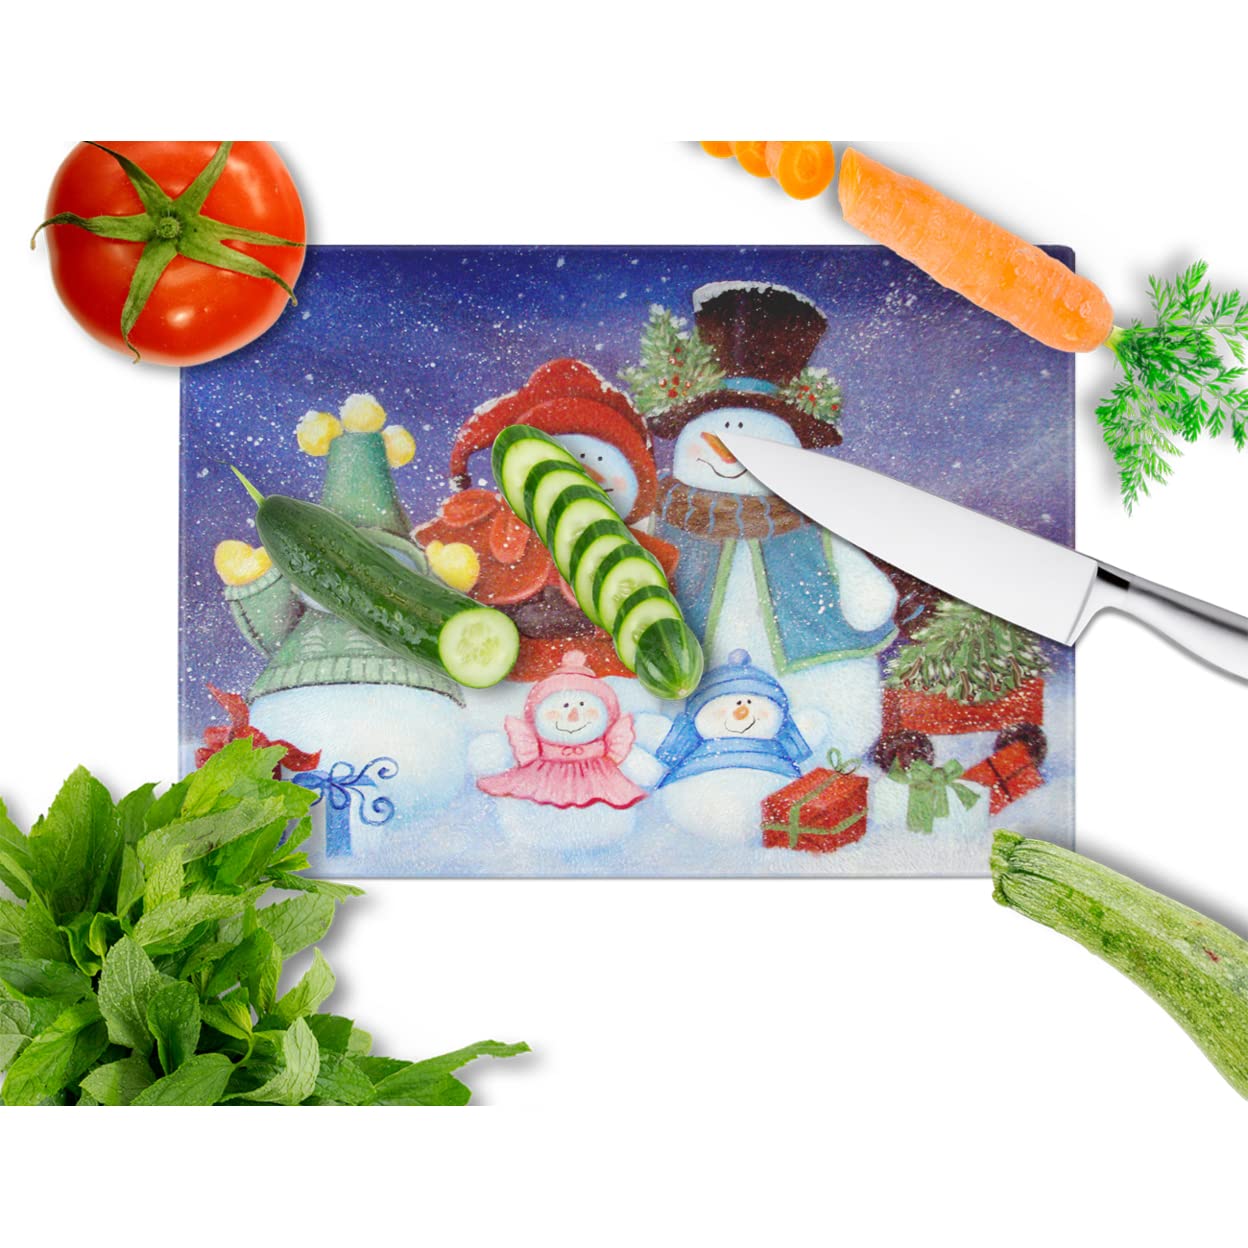 Caroline's Treasures PJC1080LCB Merry Christmas From Us All Snowman Glass Cutting Board Large Decorative Tempered Glass Kitchen Cutting and Serving Board Large Size Chopping Board